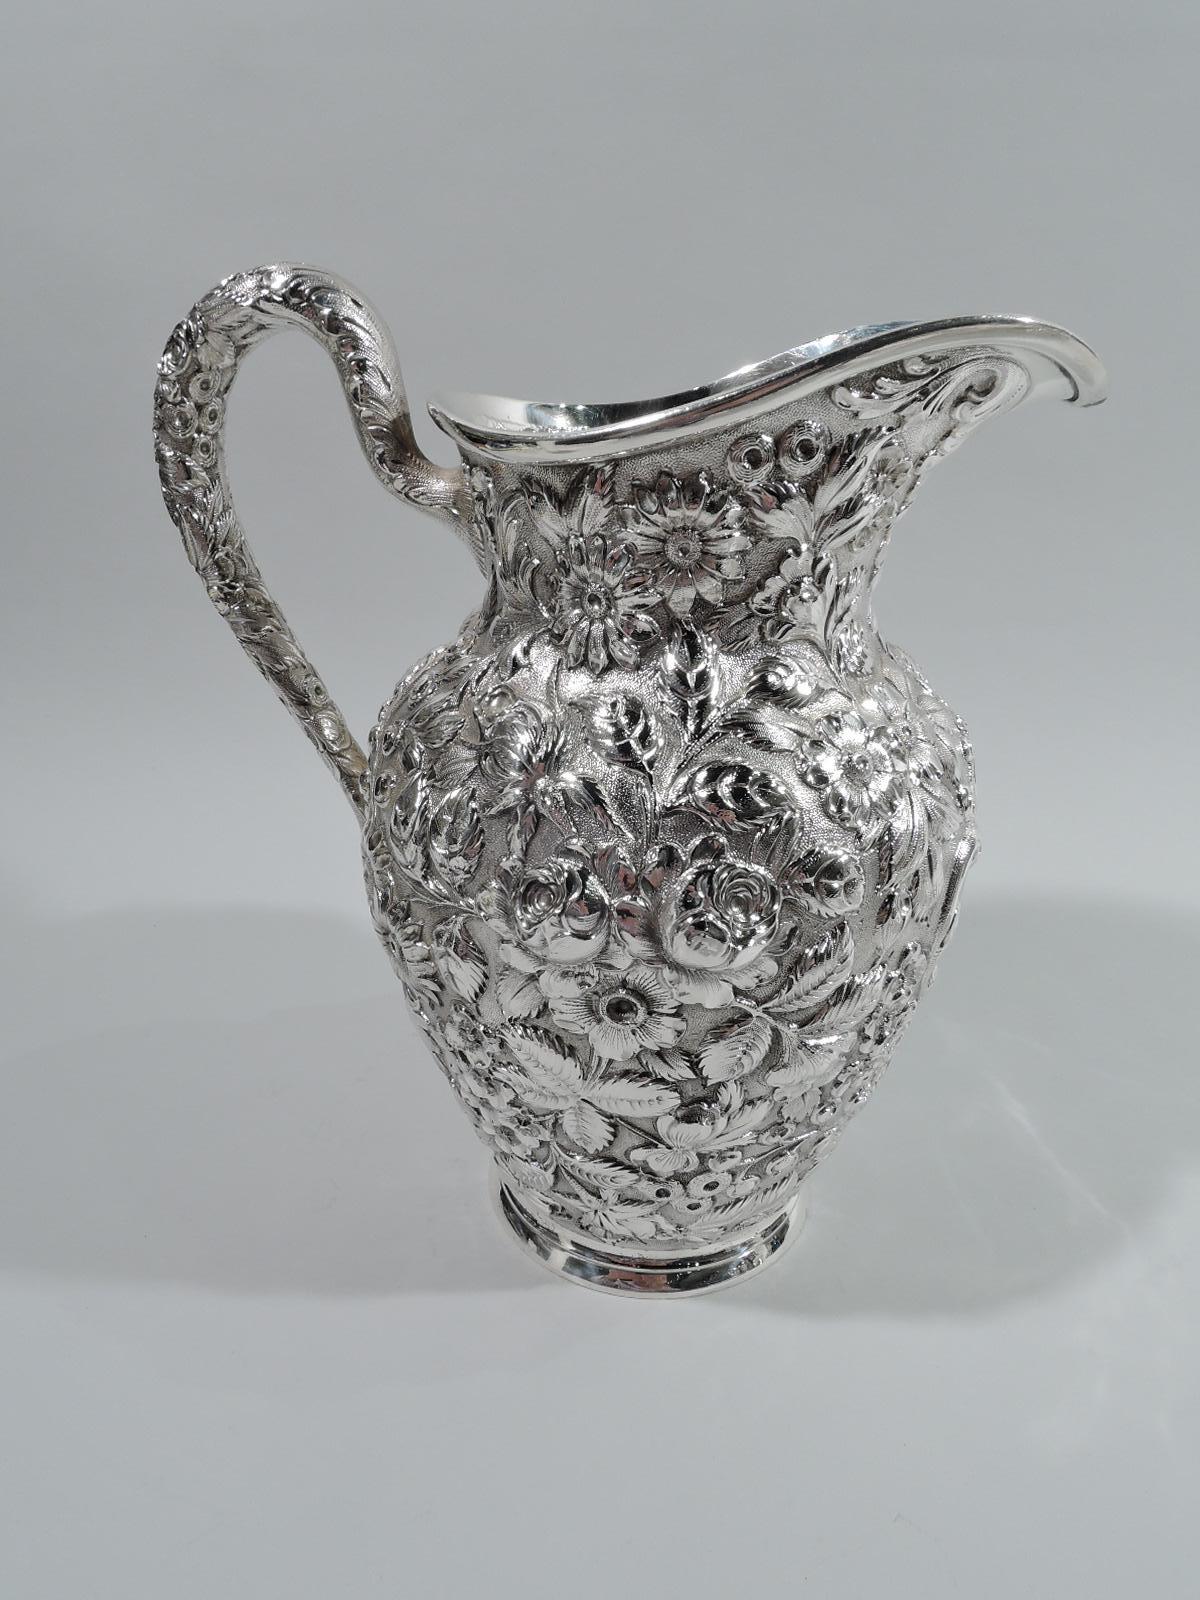 American Baltimore Repousse Sterling Silver Drinks Set with Pitcher & Goblets